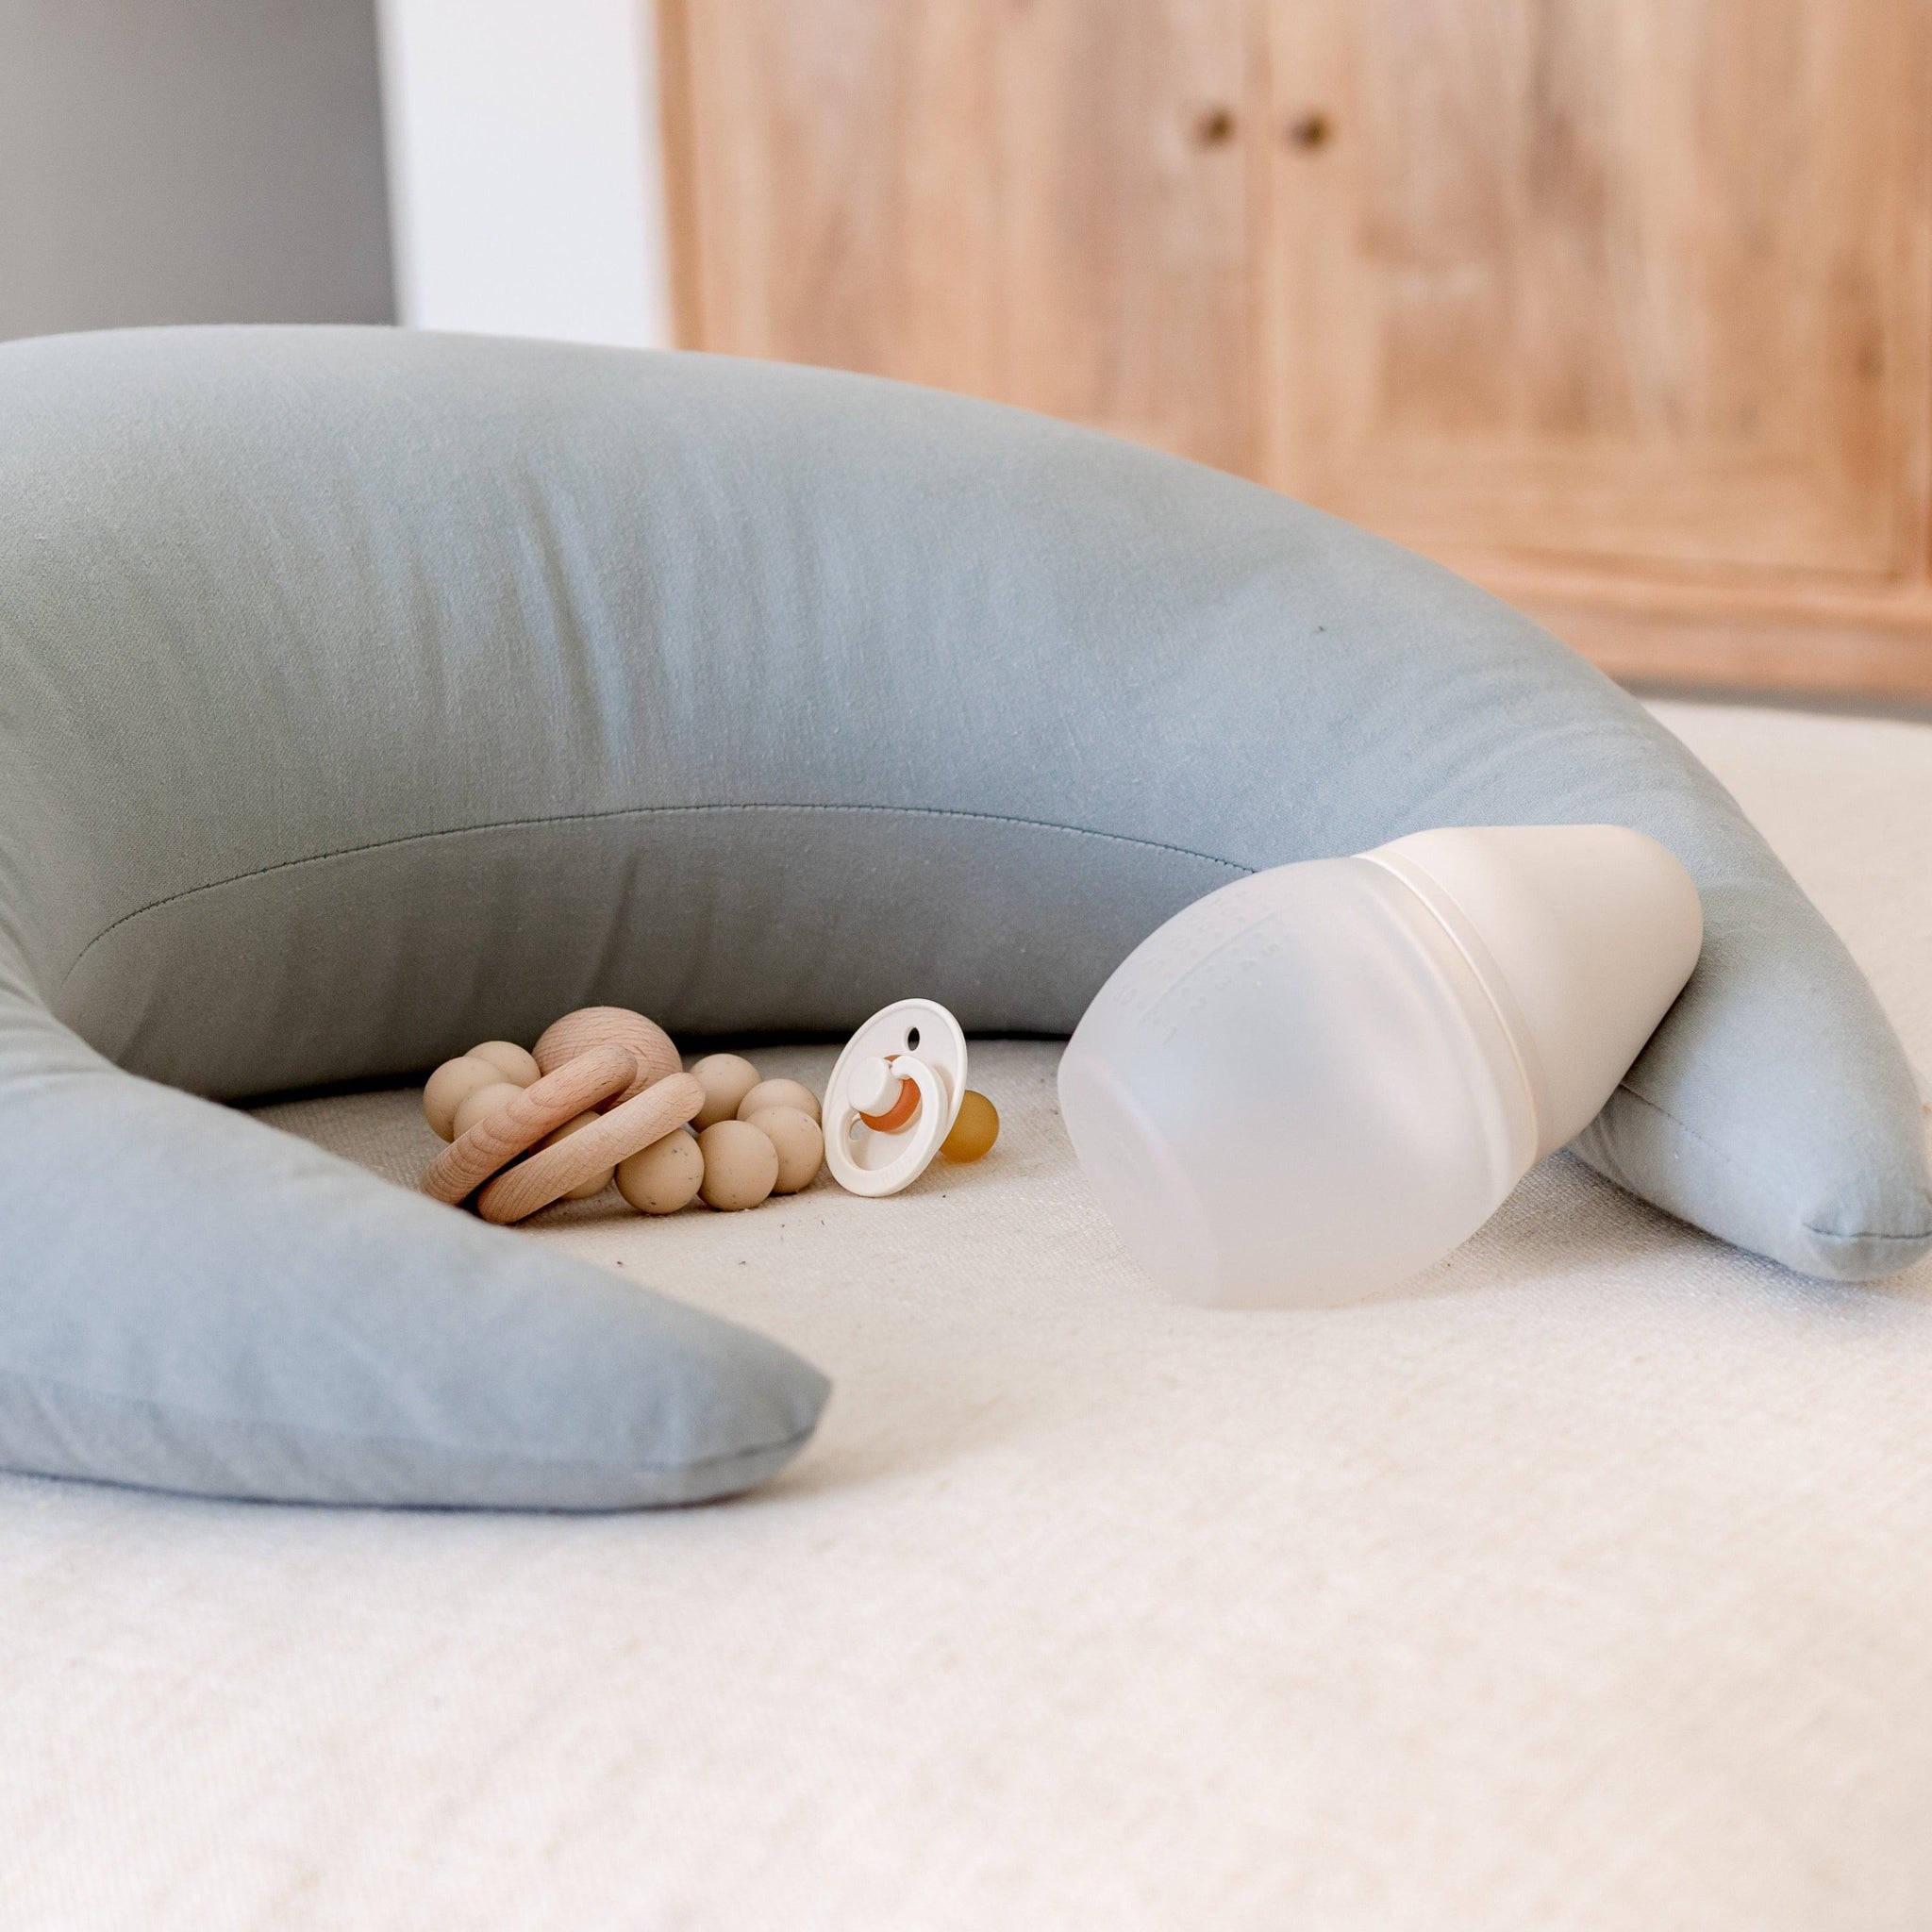 A Snuggle Me Feeding & Support Pillow in a crescent shape in the shade Slate on a bed next to a bottle and dummy.